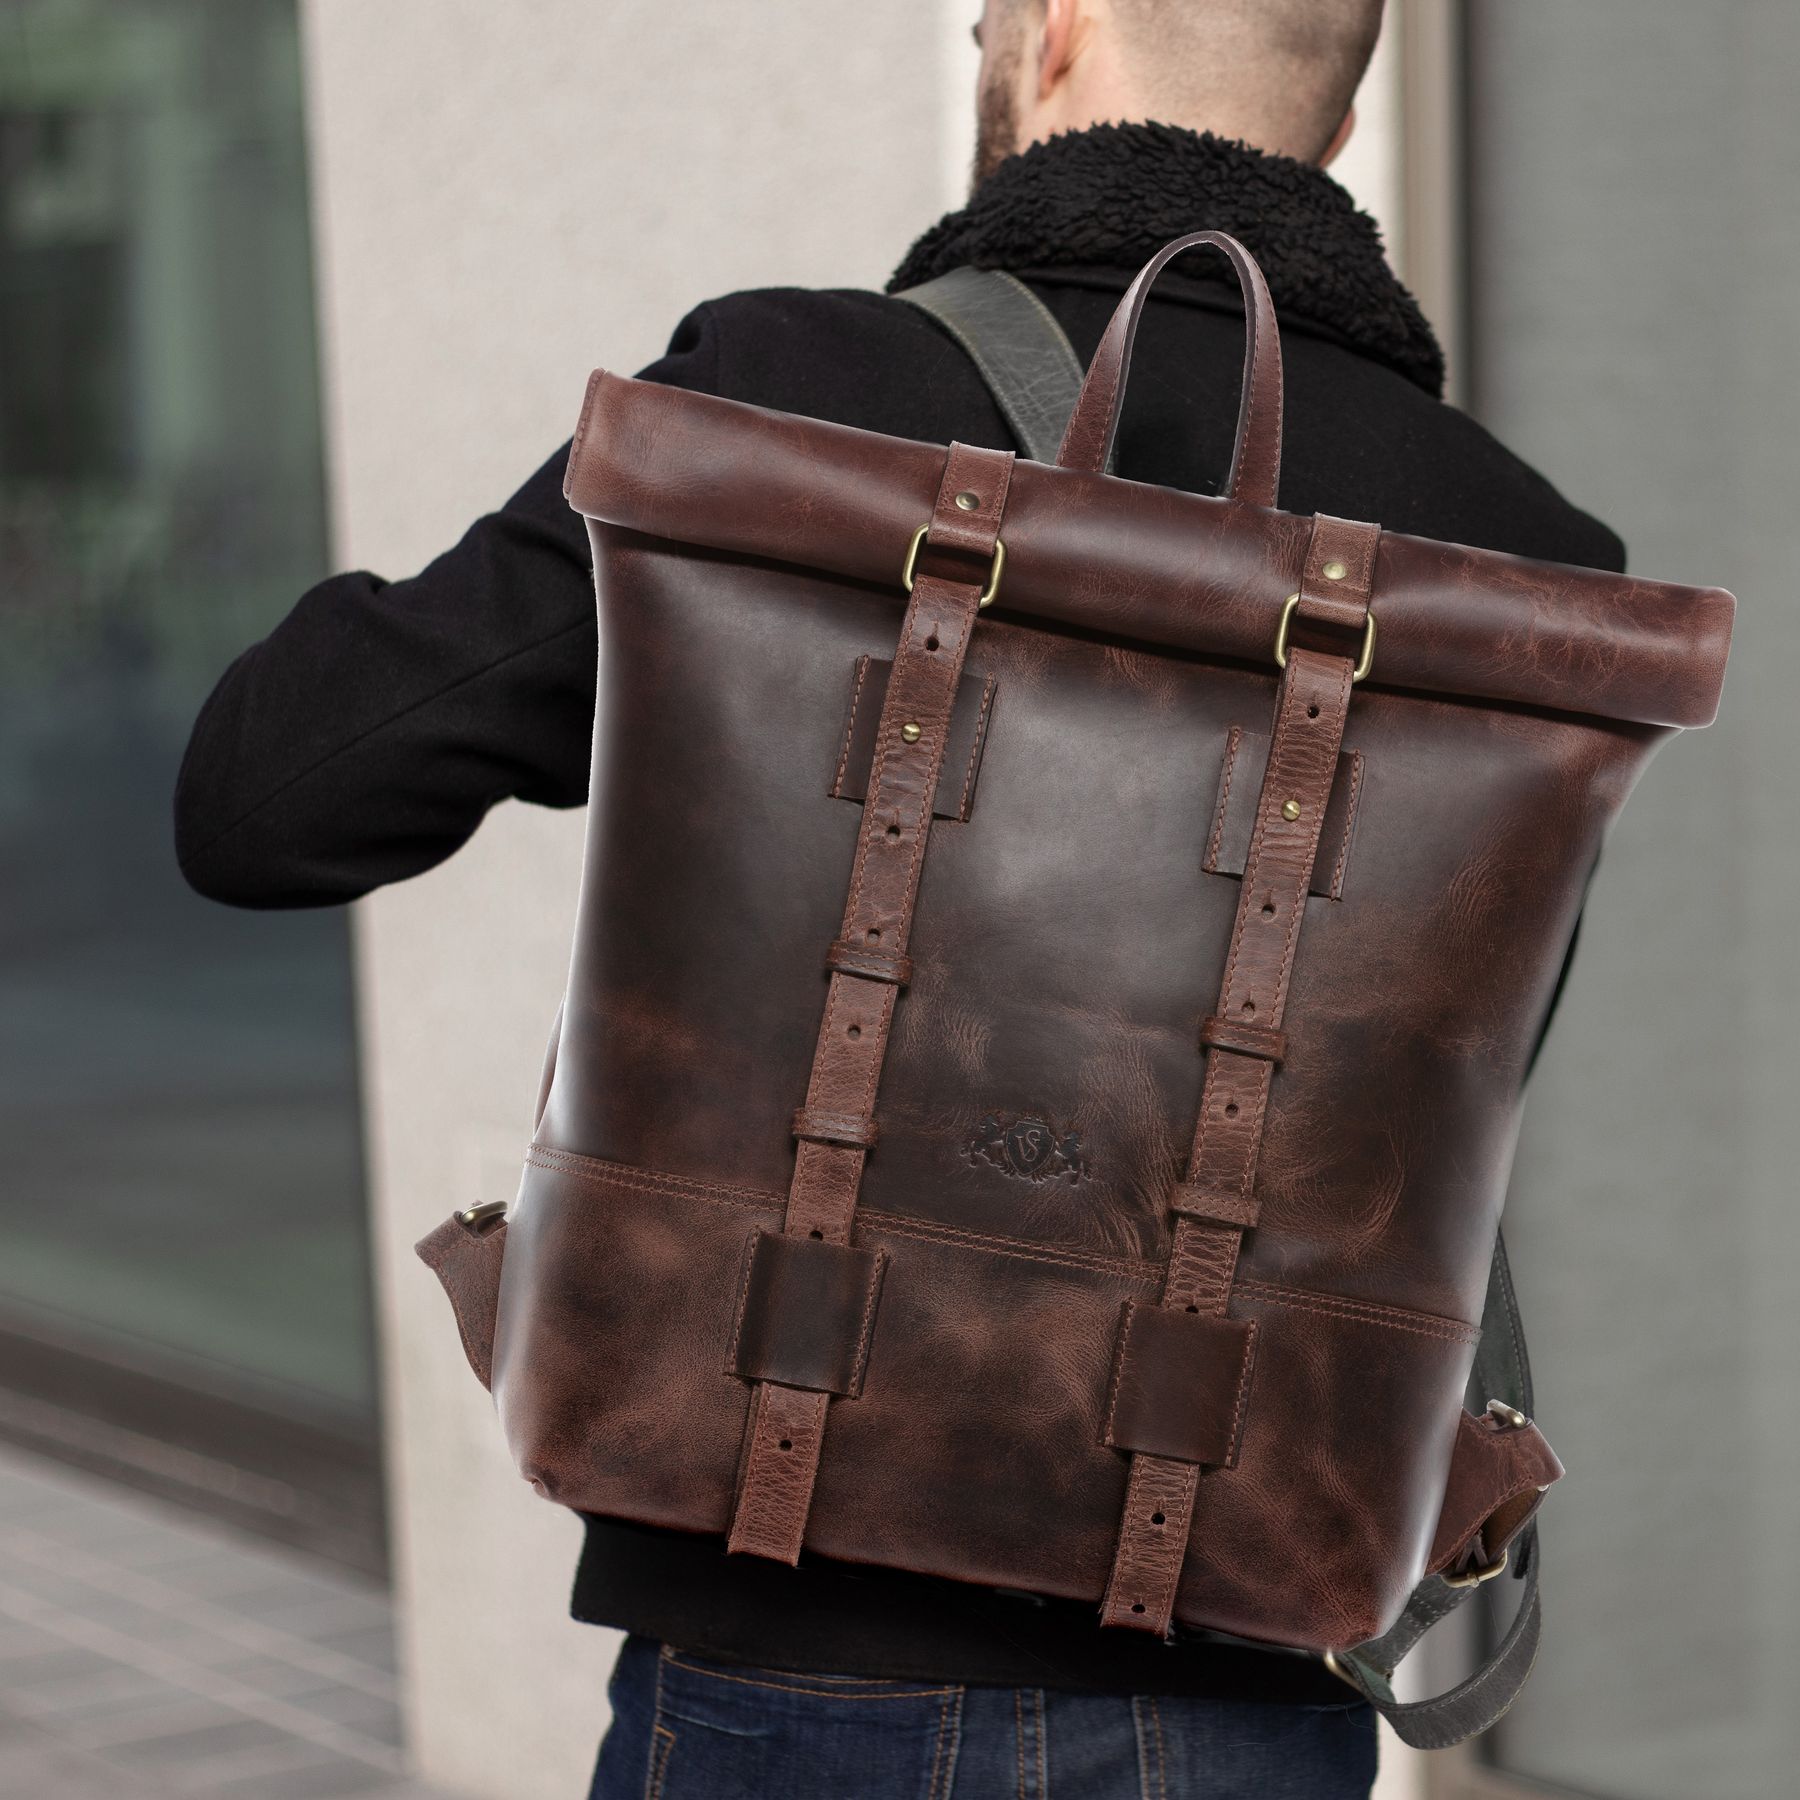 Rolltop backpack CHAZ buffalo leather vintage brown